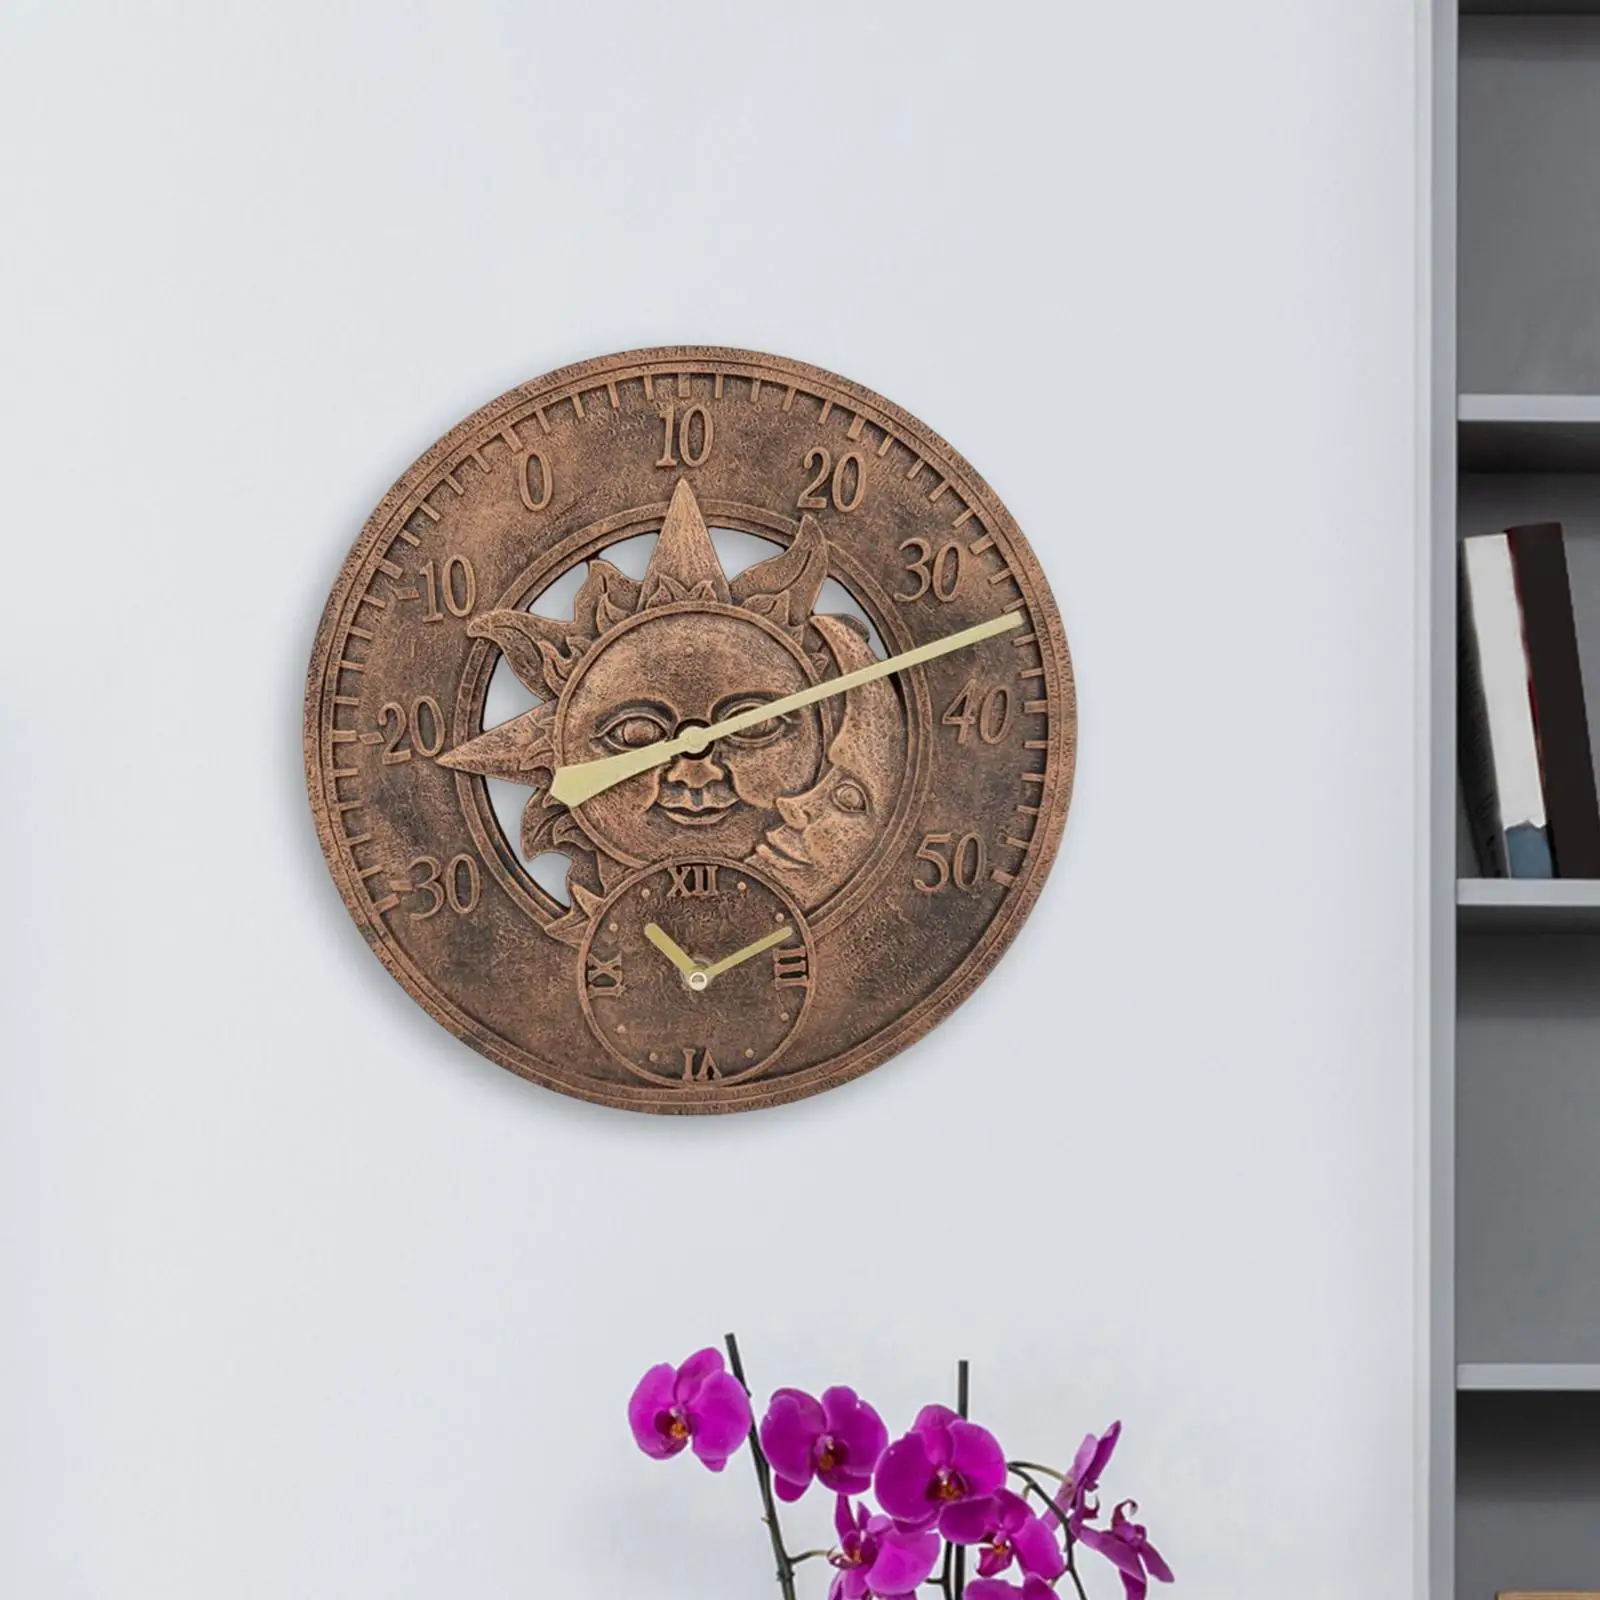 30cm Wall Clock Waterproof with Temperature Display Sun Decorative Indoor Outdoor Silent Hanging Watches for Porch Backyard